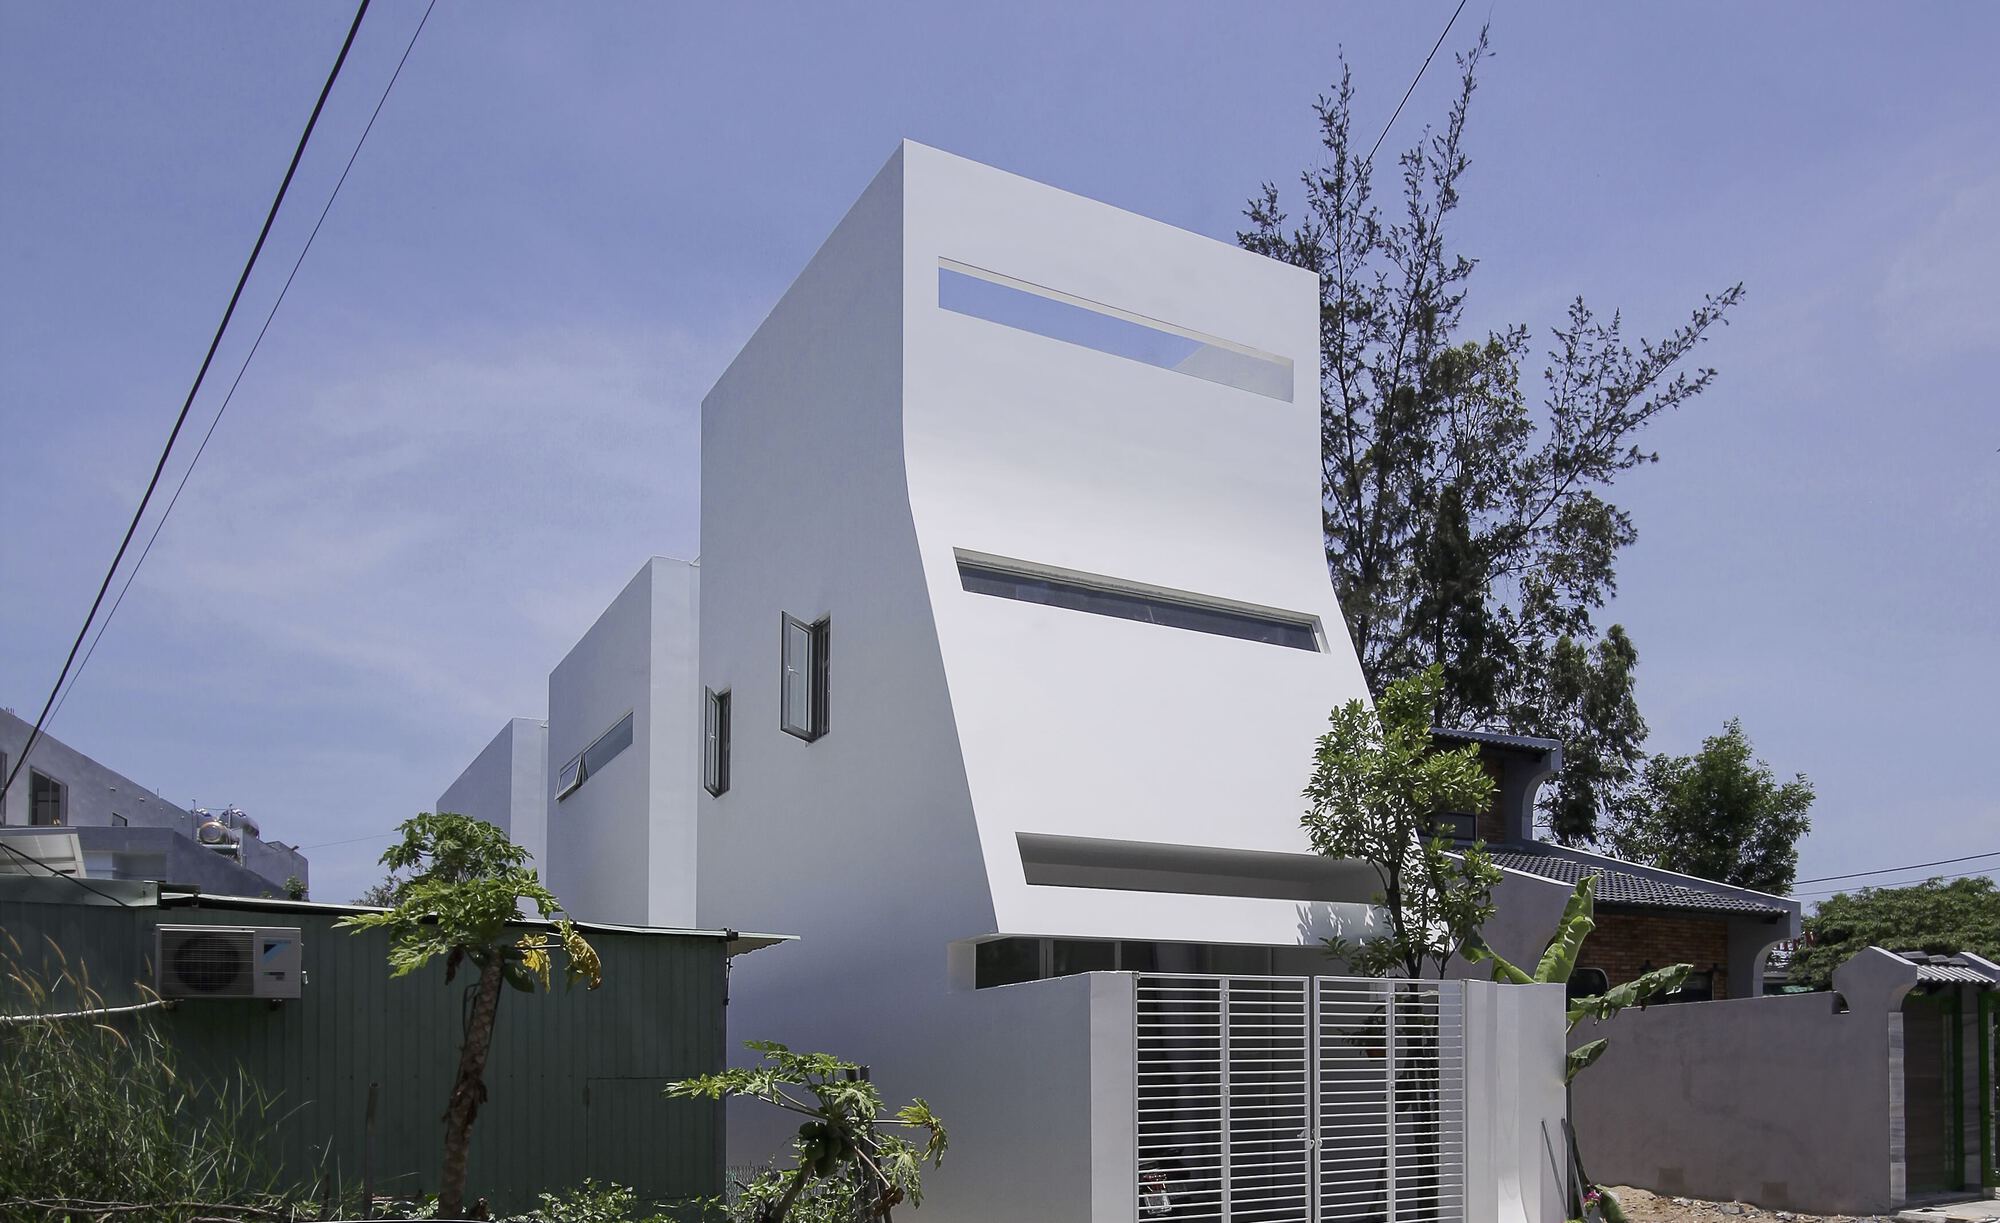 From the outside, the minimalist house has a 3-part structure